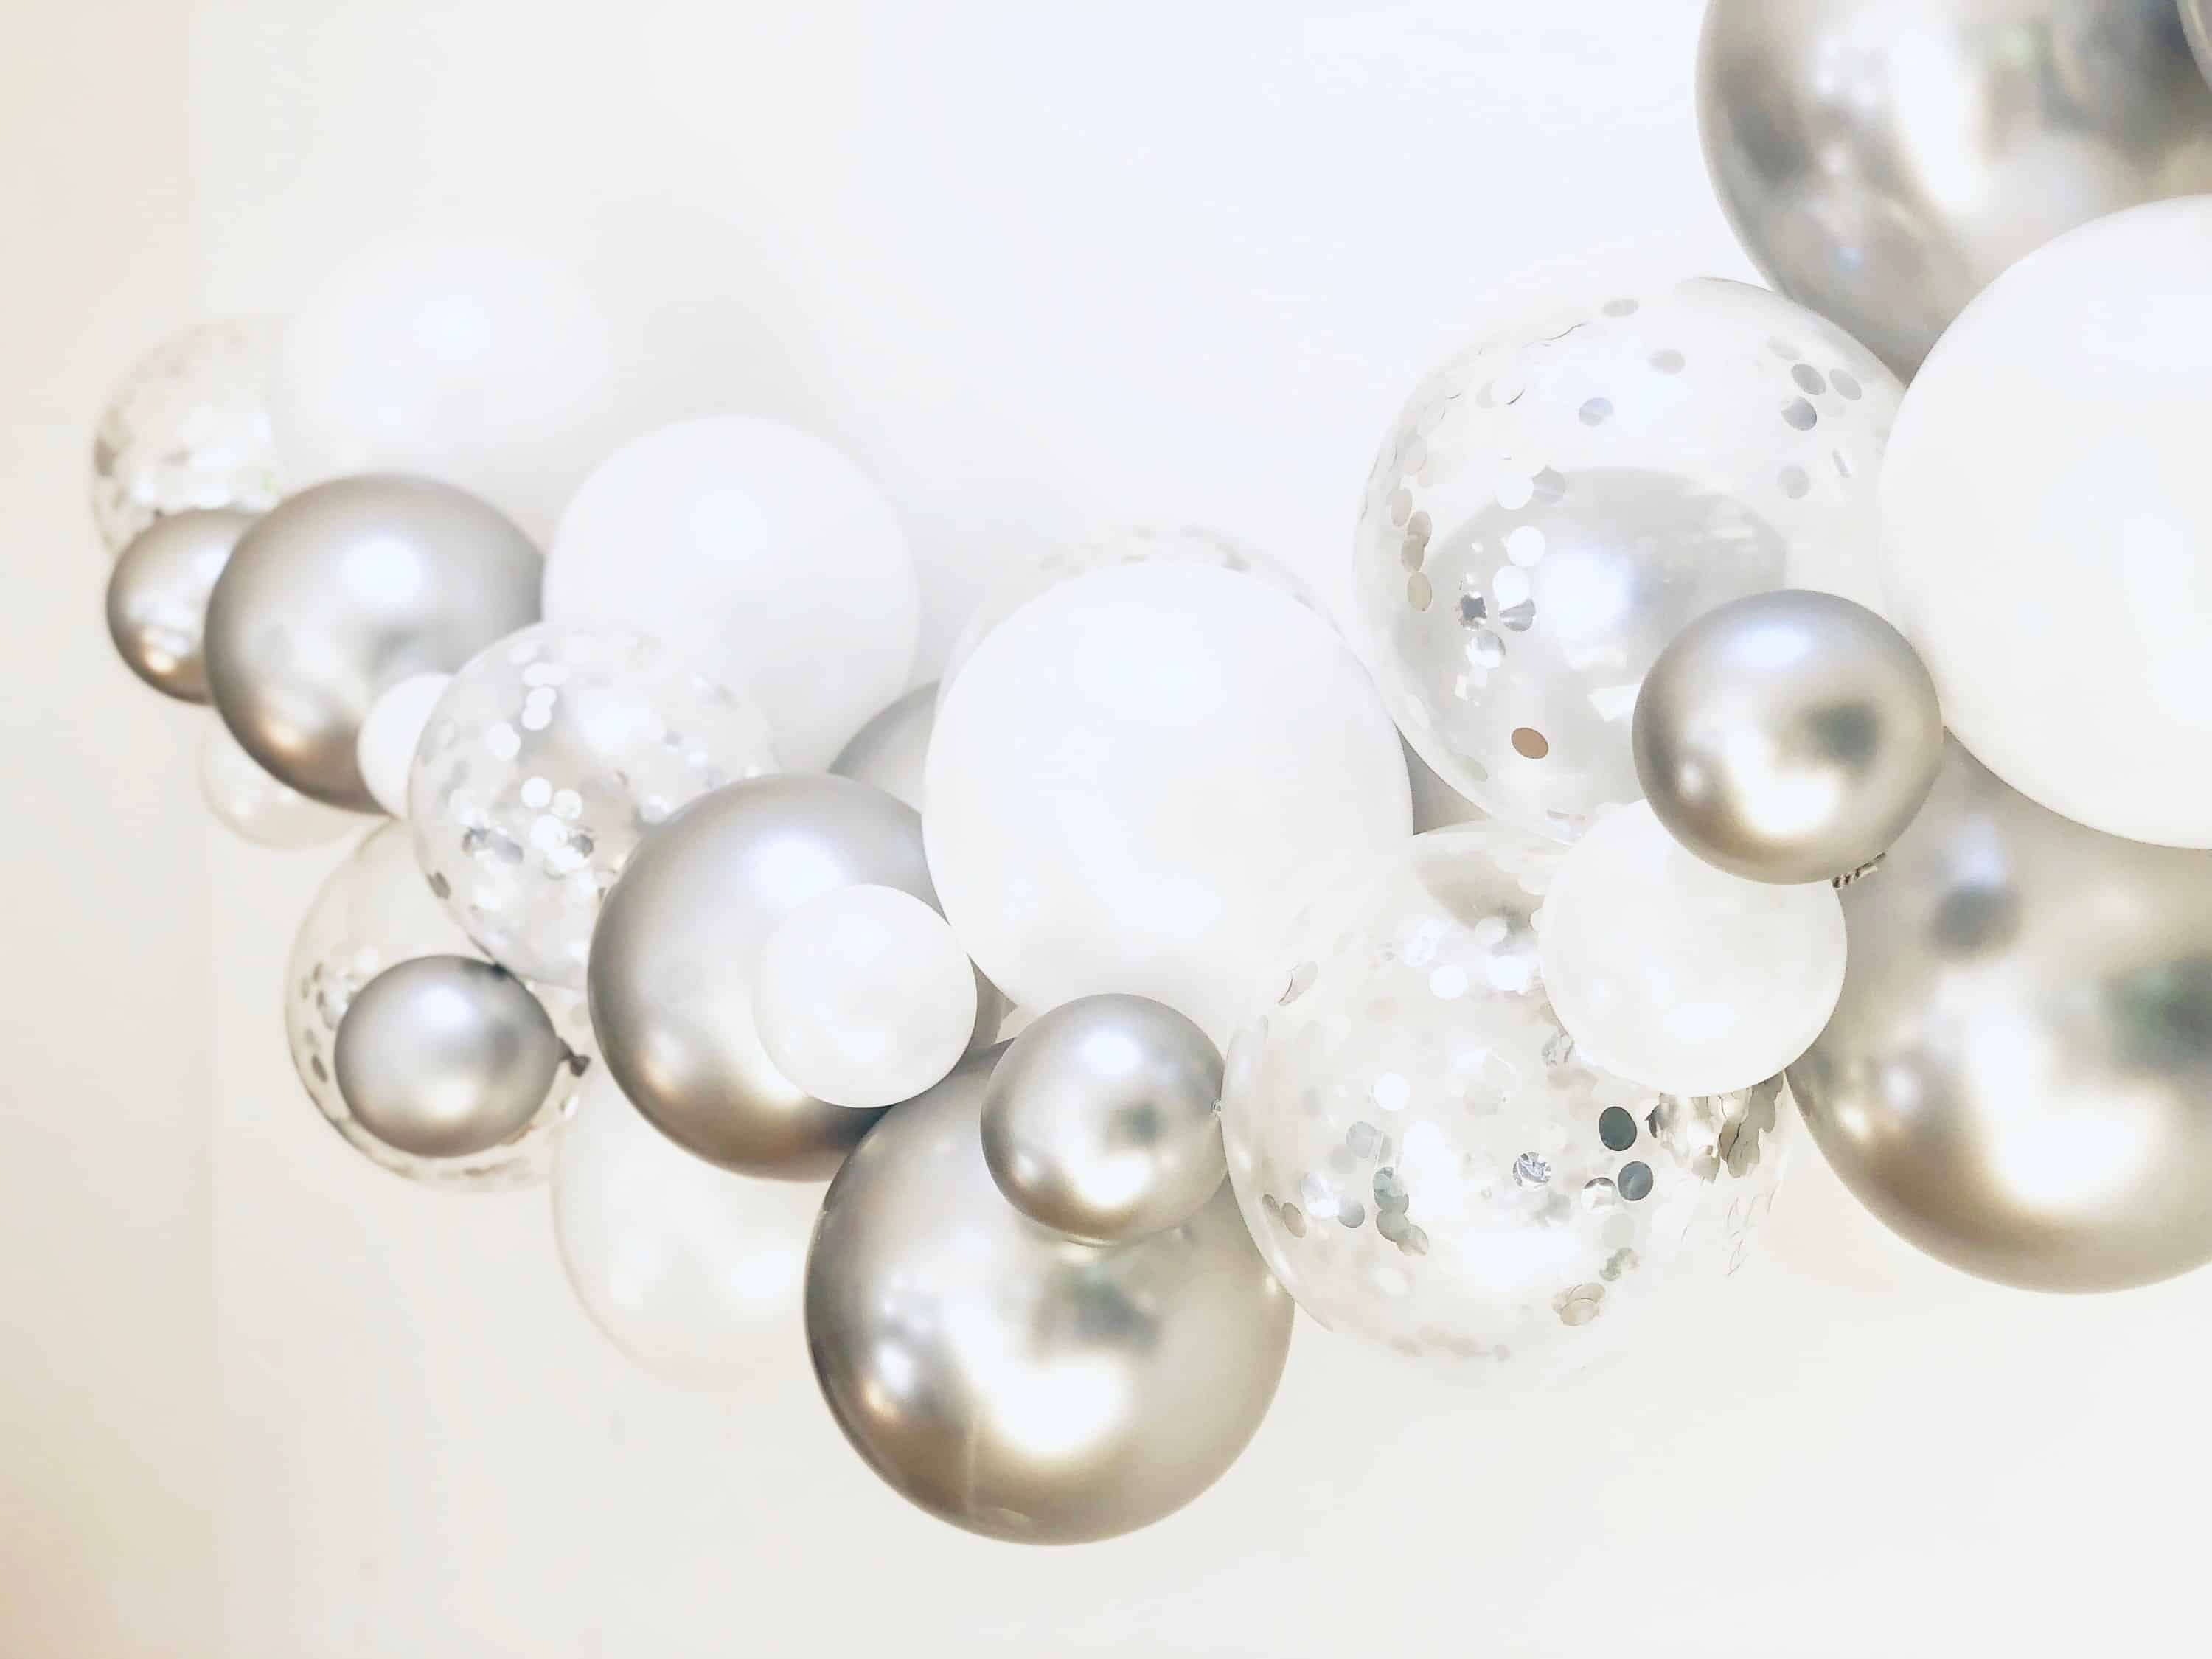 Silver and White Balloon Garland Detail